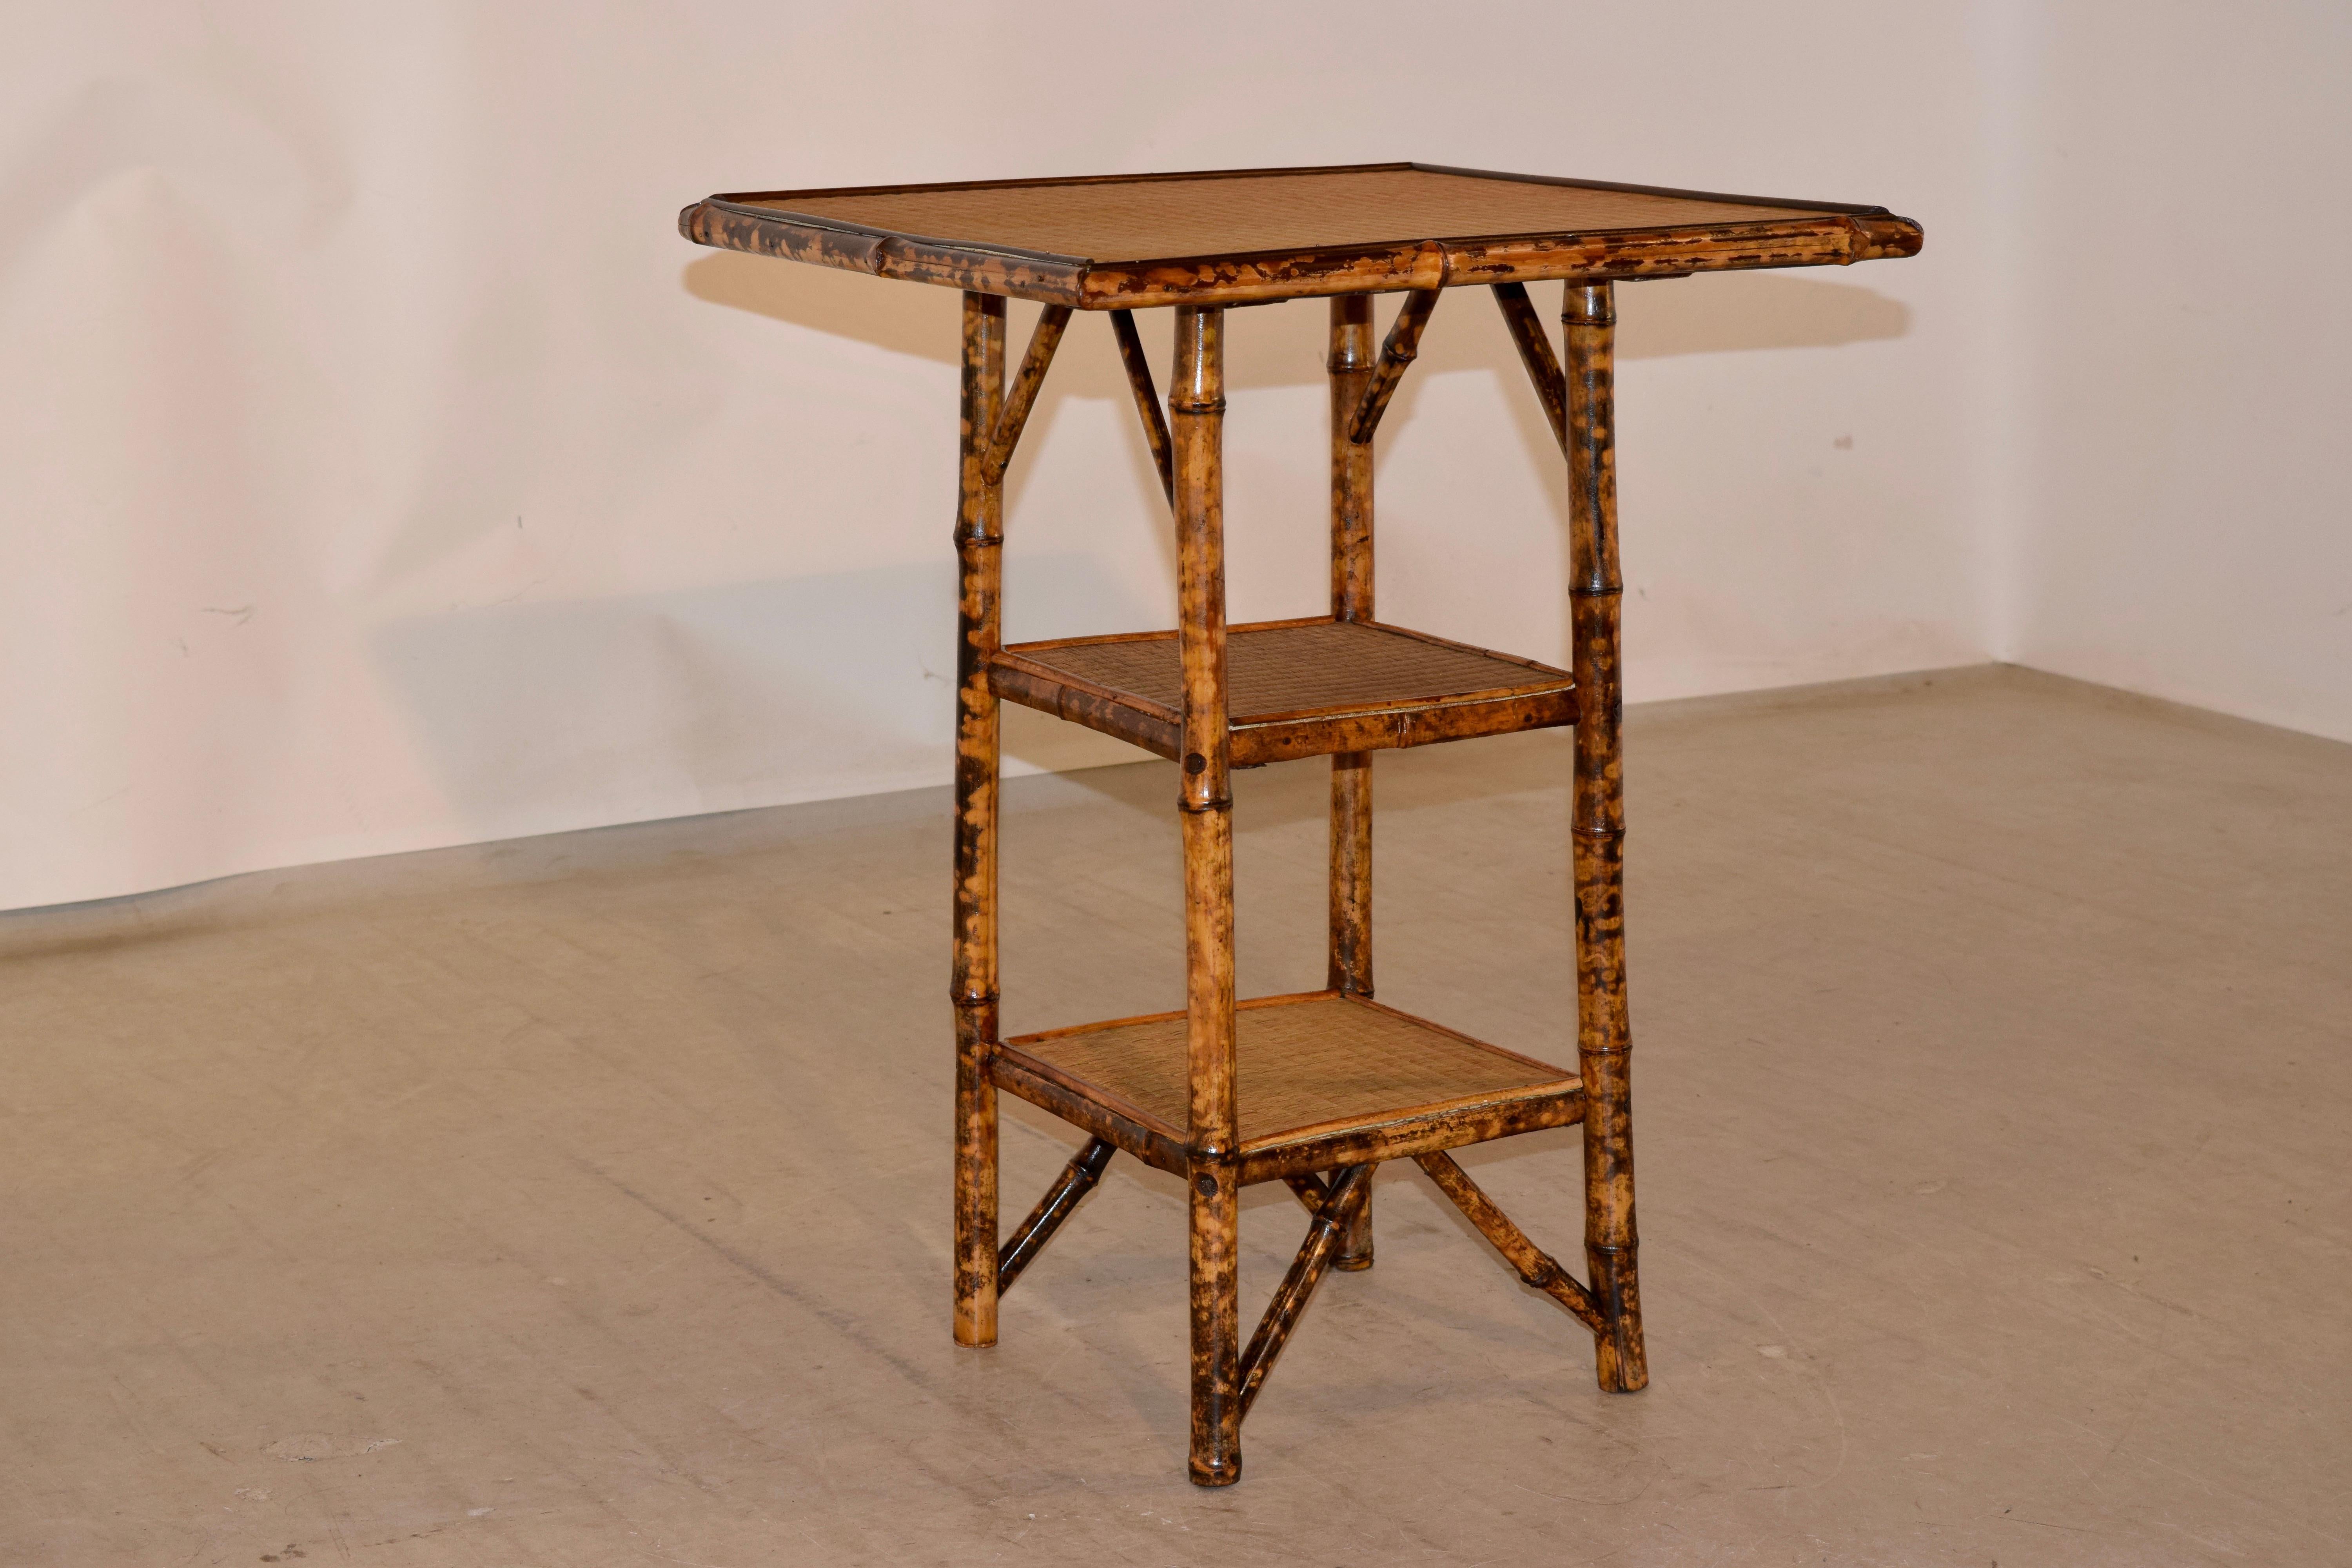 19th century tortoise bamboo table from France with rush covered top and two lower shelves.